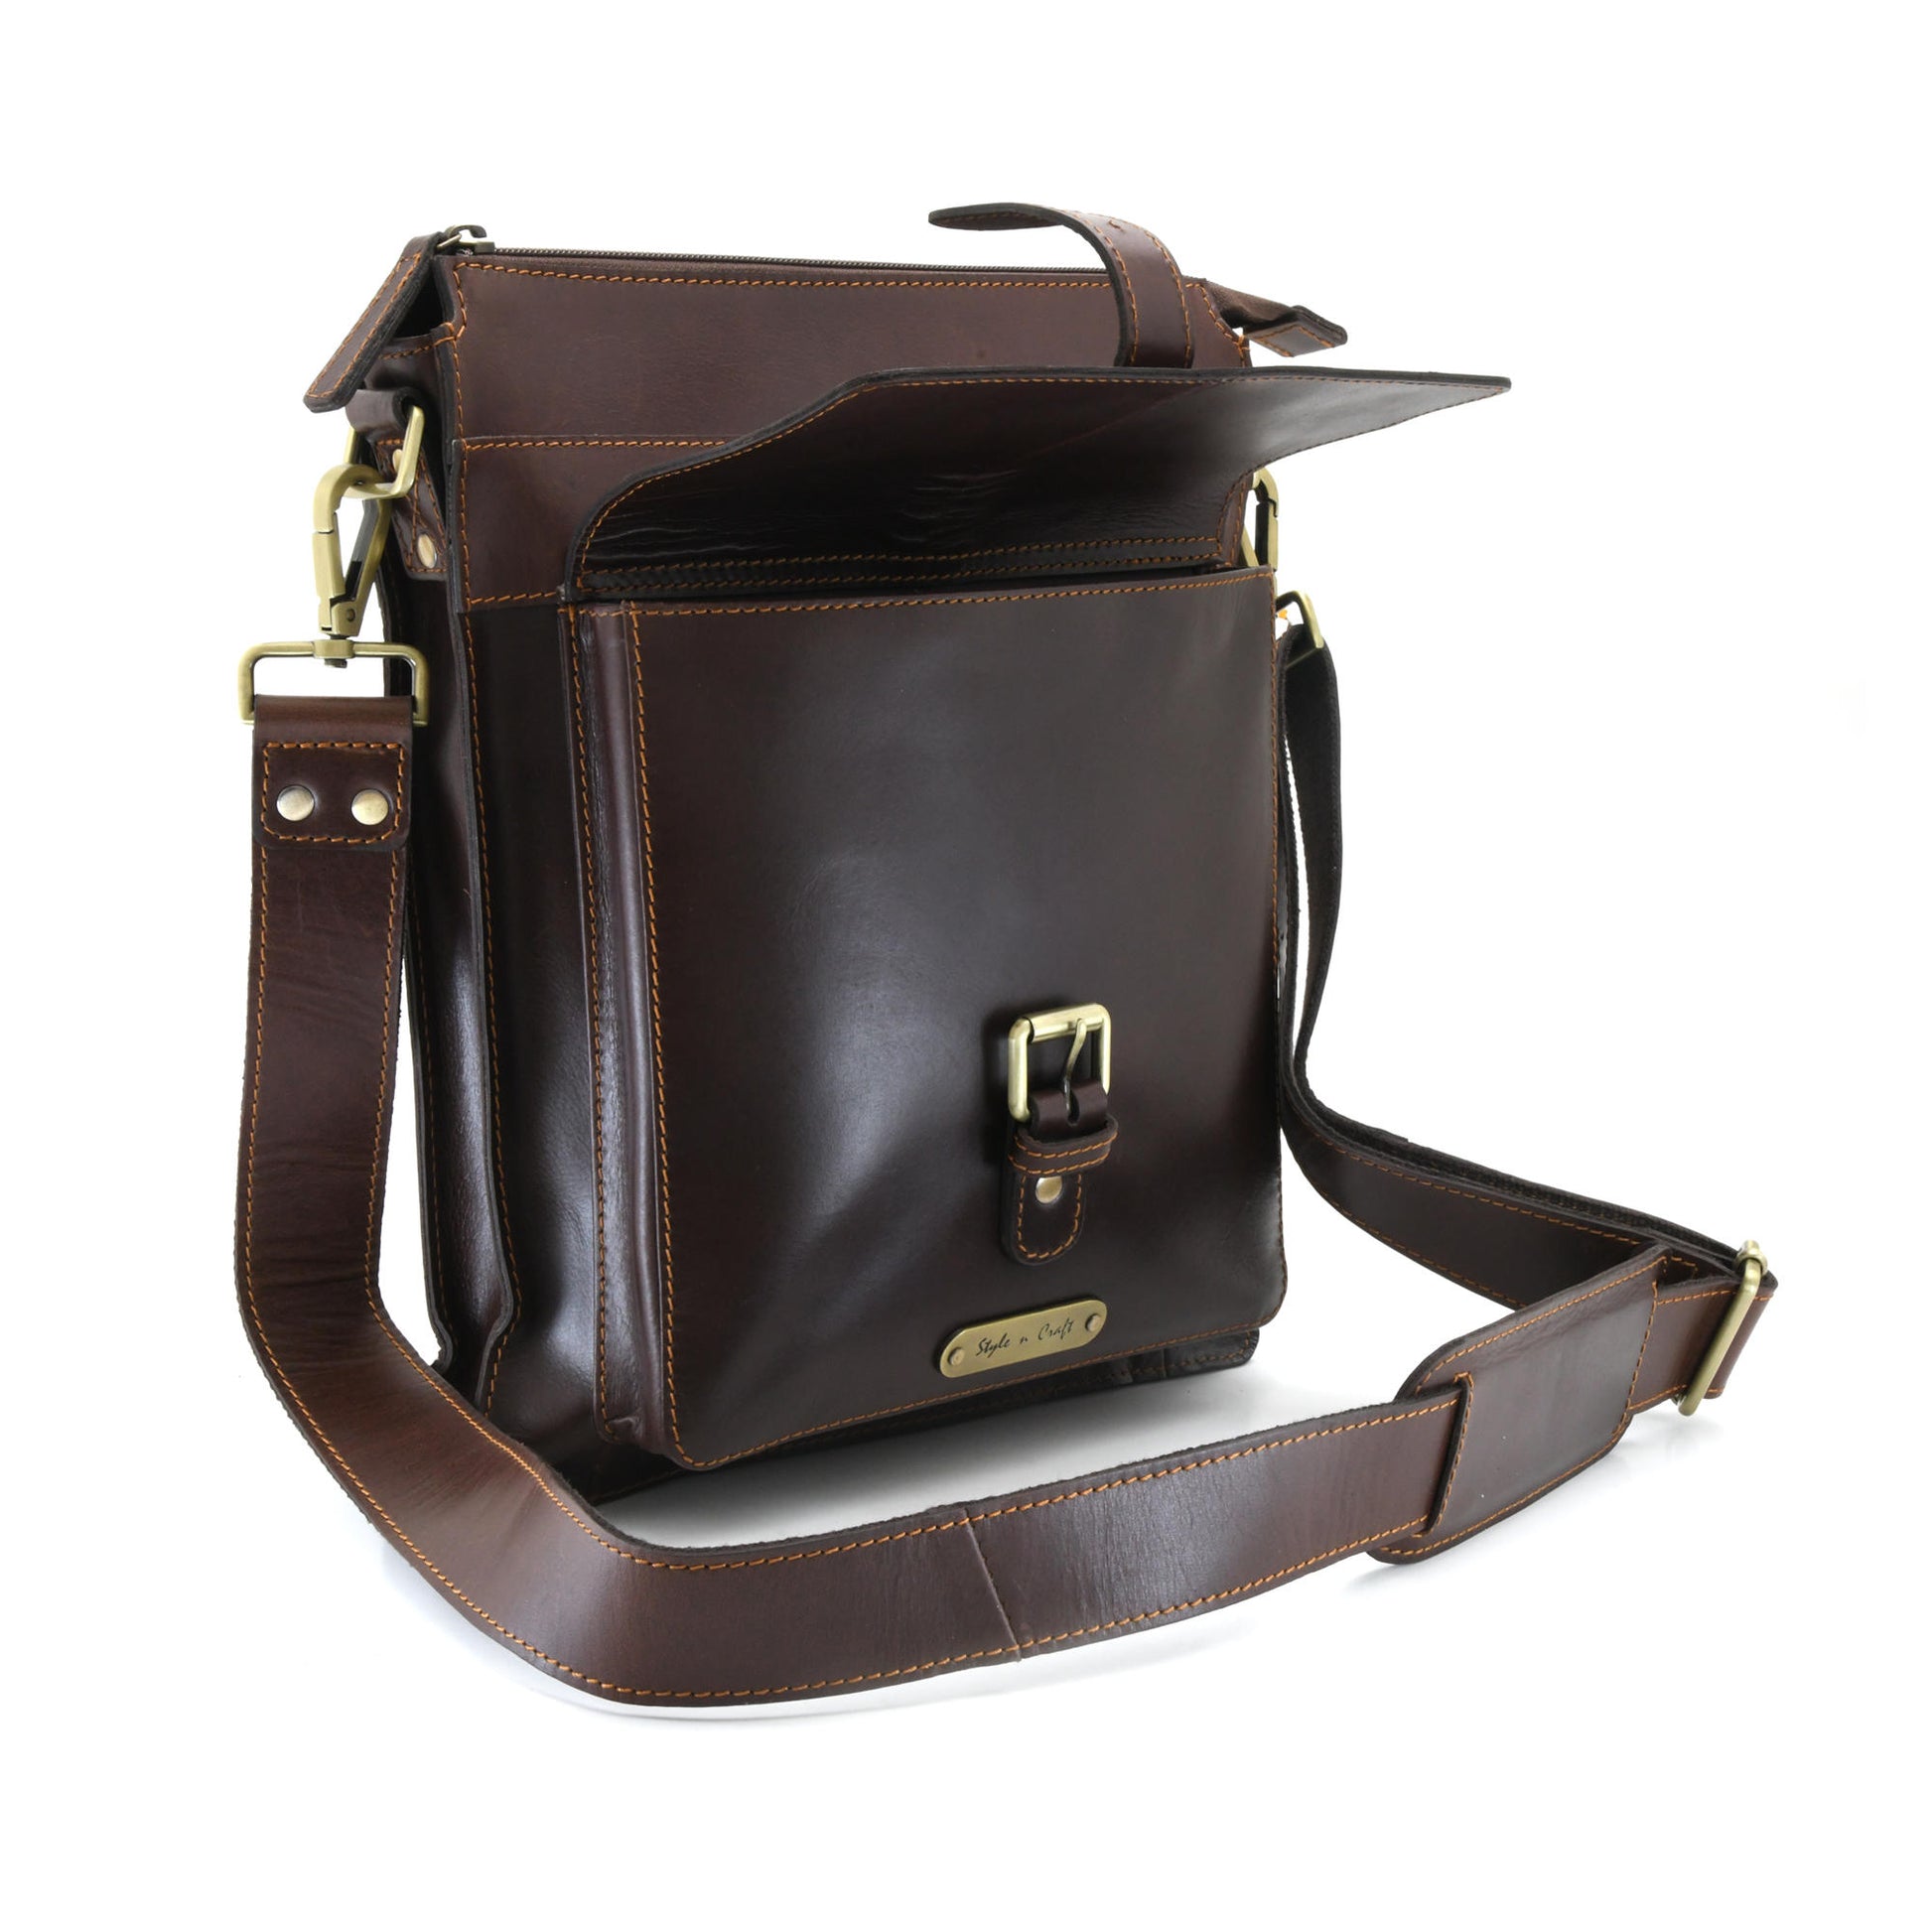 Style n Craft 392002 Tall Messenger Bag in Full Grain Dark Brown Leather - Front Angled View Showing the Front Flap Pocket